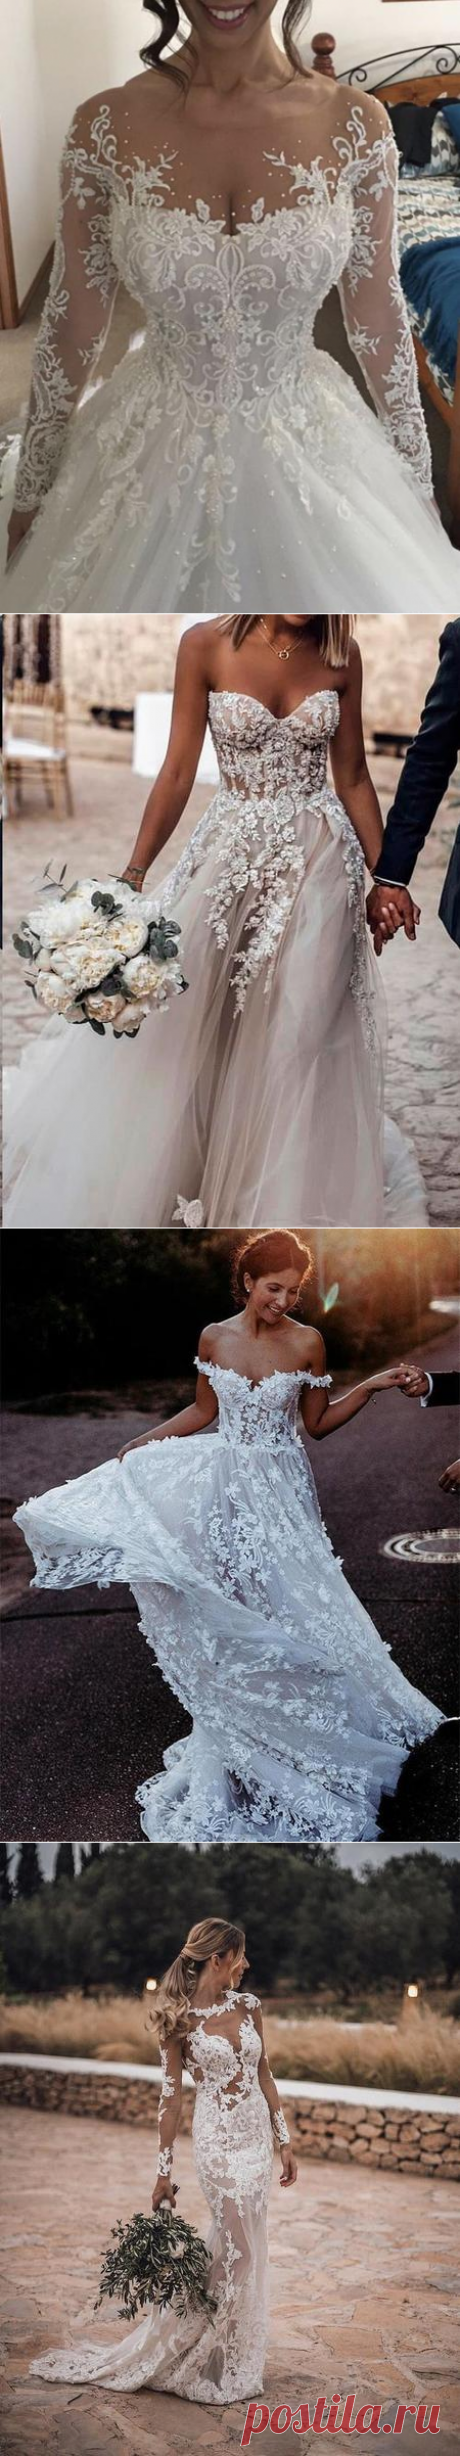 Chic Wedding Dresses Scoop Long Sleeve Ball Gown Beading Bridal Gown J – Anna PromDress